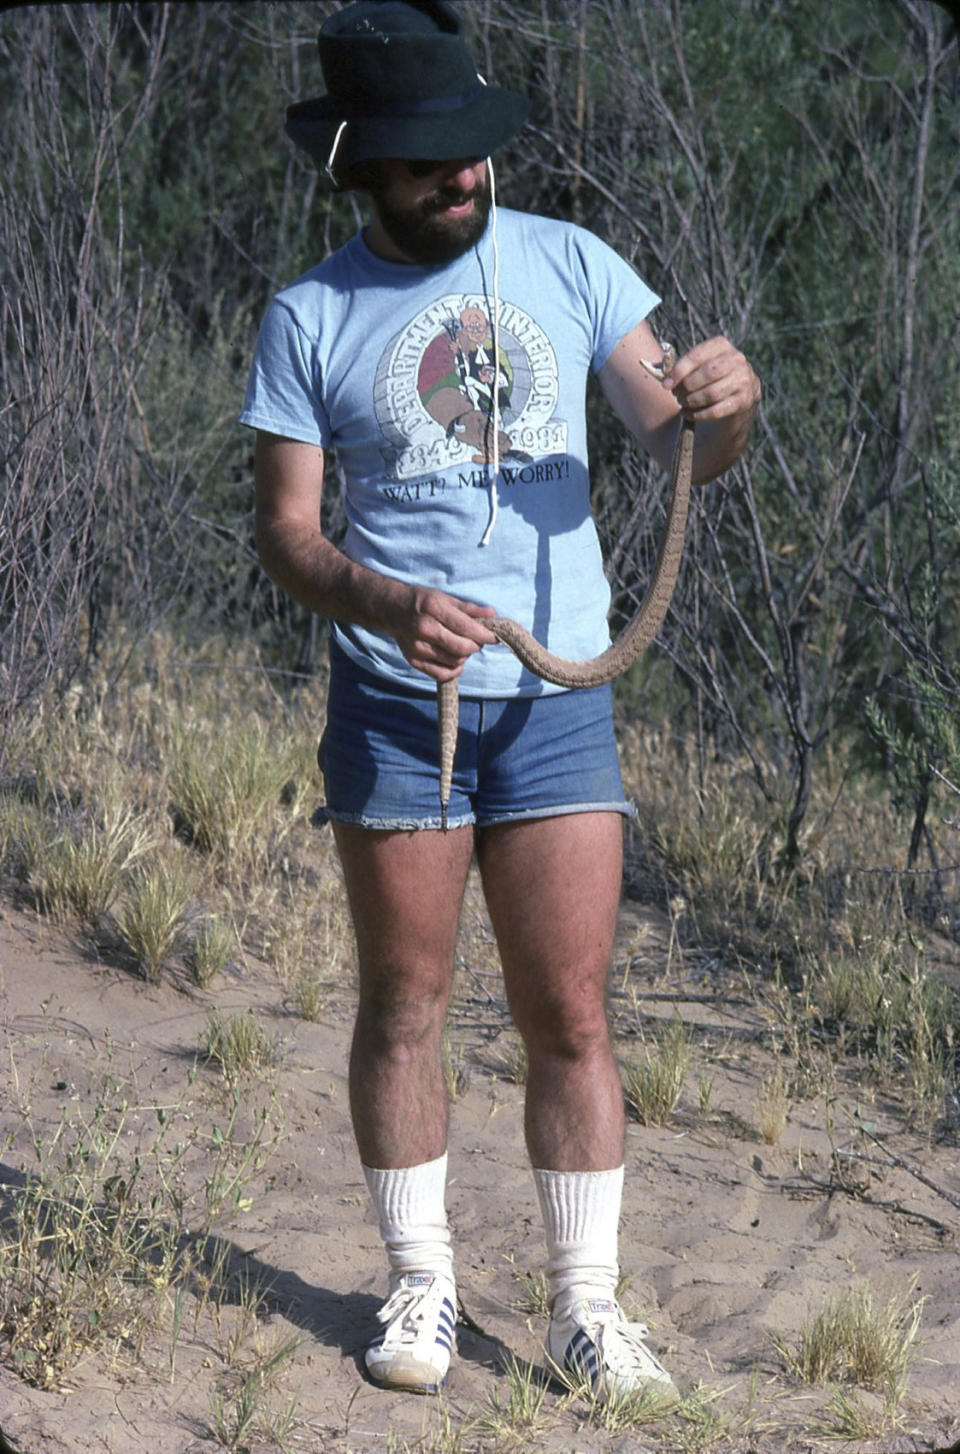 In this June 1982 self portrait, C. Kenneth Dodd Jr. holds a pink Grand Canyon Rattlesnake. Dodd was participating in a survey of riparian areas along the Colorado River with the National Park Service and the U.S. Fish & Wildlife Service. (Courtesy of C. Kenneth Dodd Jr. via AP)